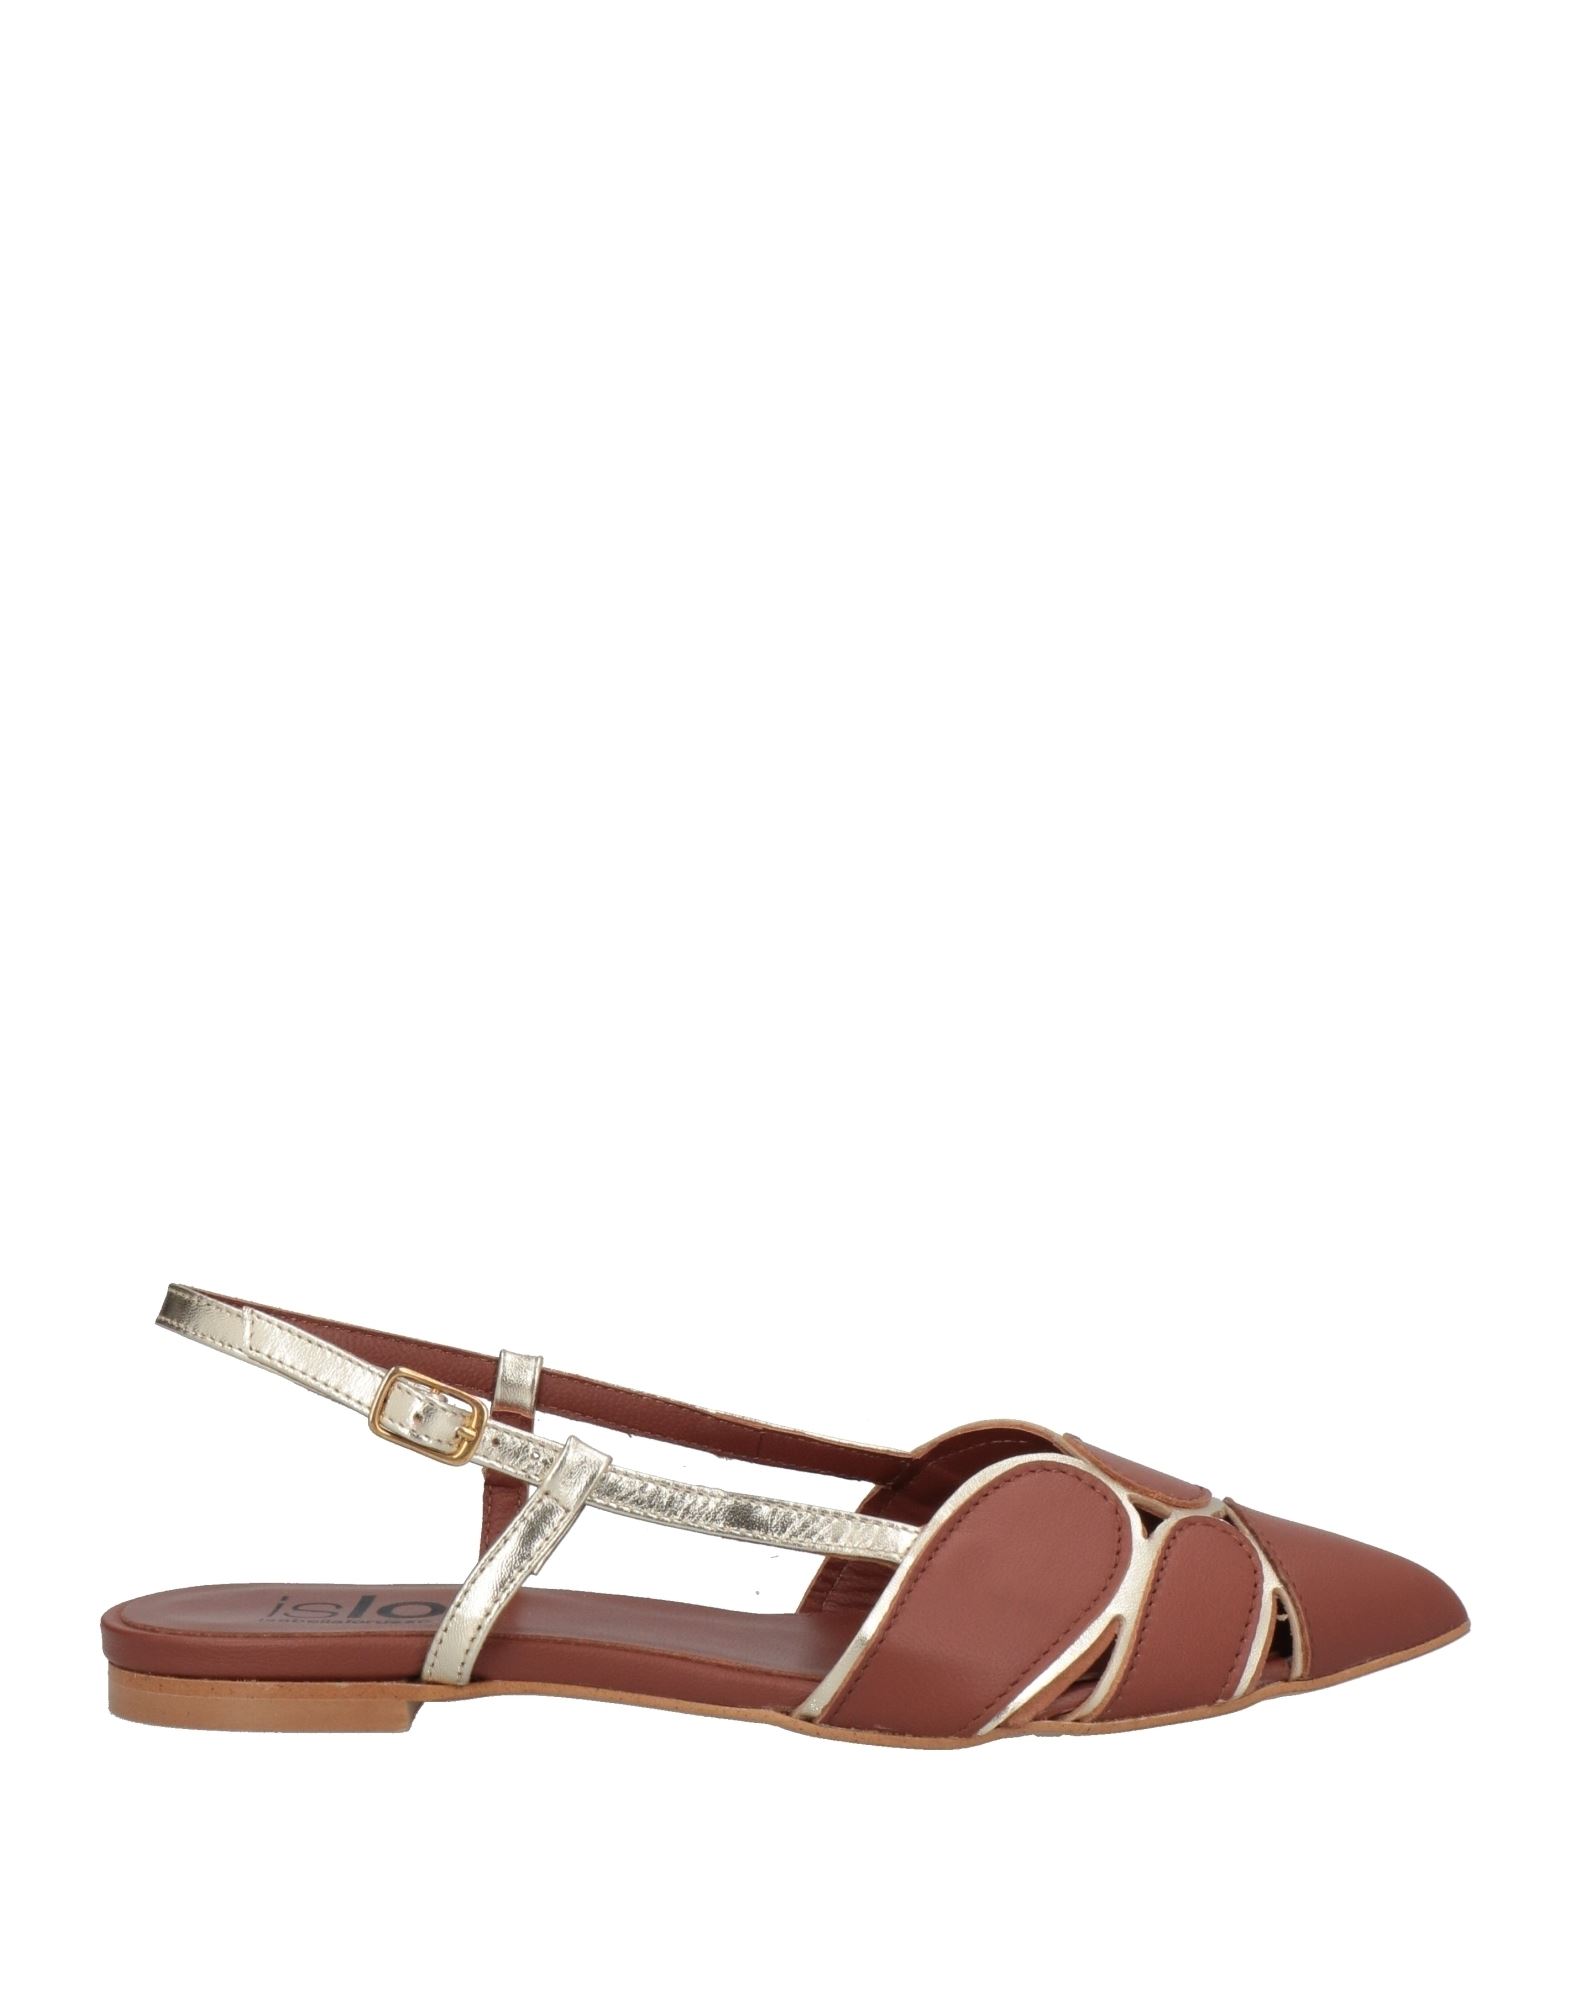 Islo Isabella Lorusso Ballet Flats In Brown